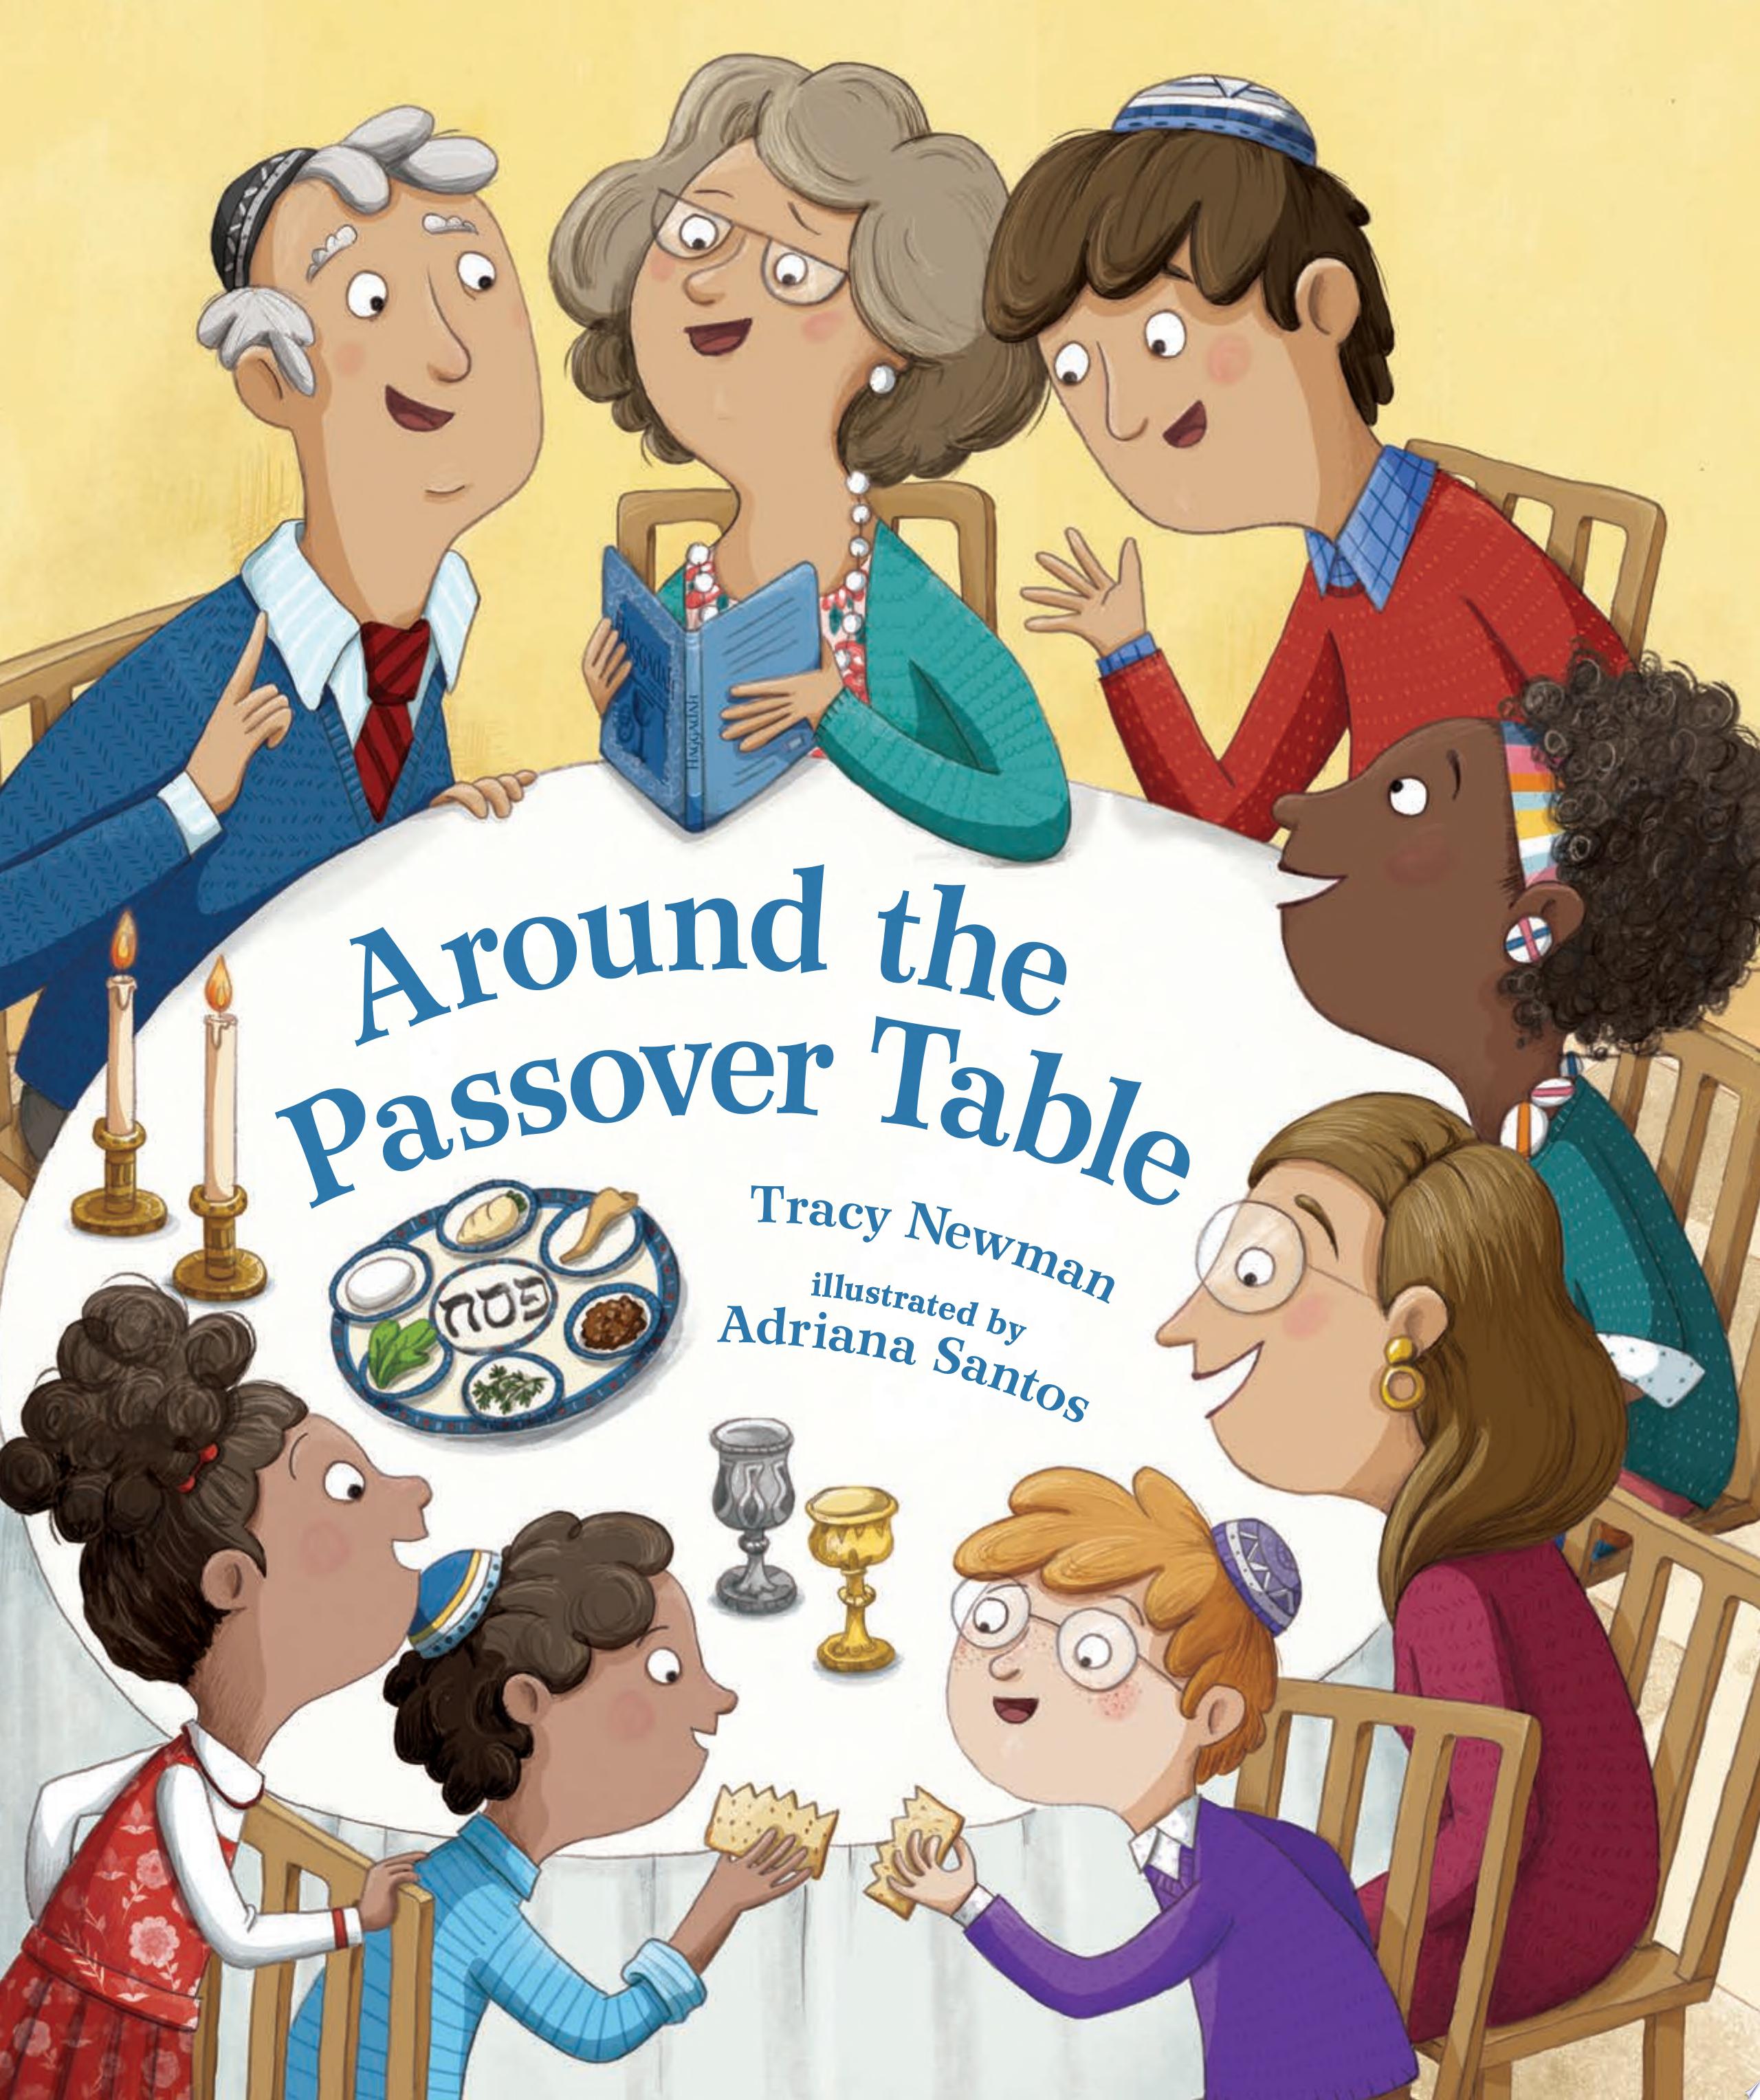 Image for "Around the Passover Table"